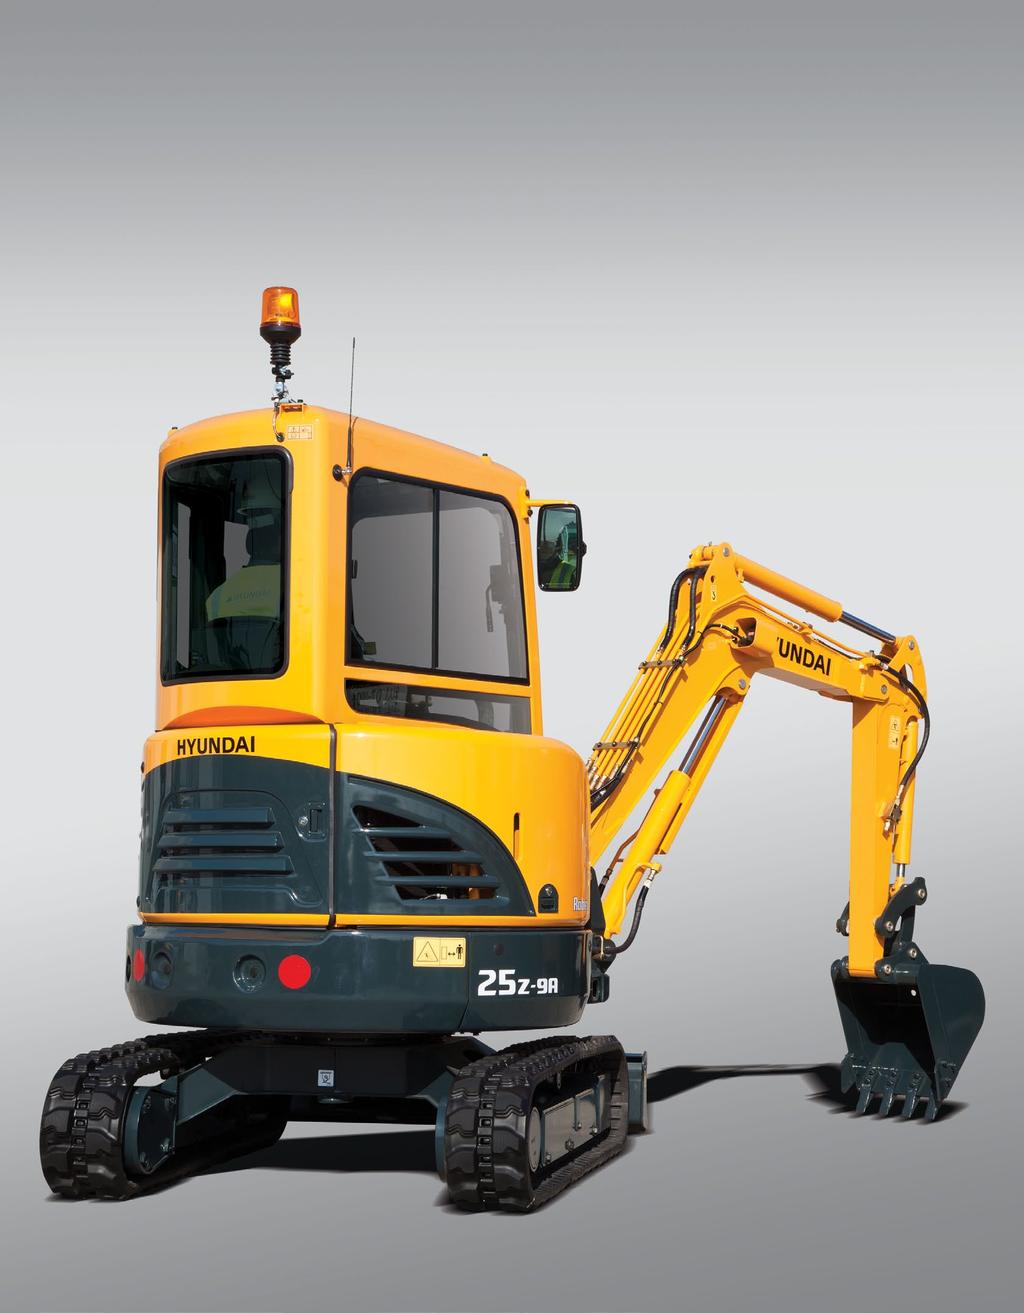 Performance 9A series is designed for maximum performance to keep the operator working